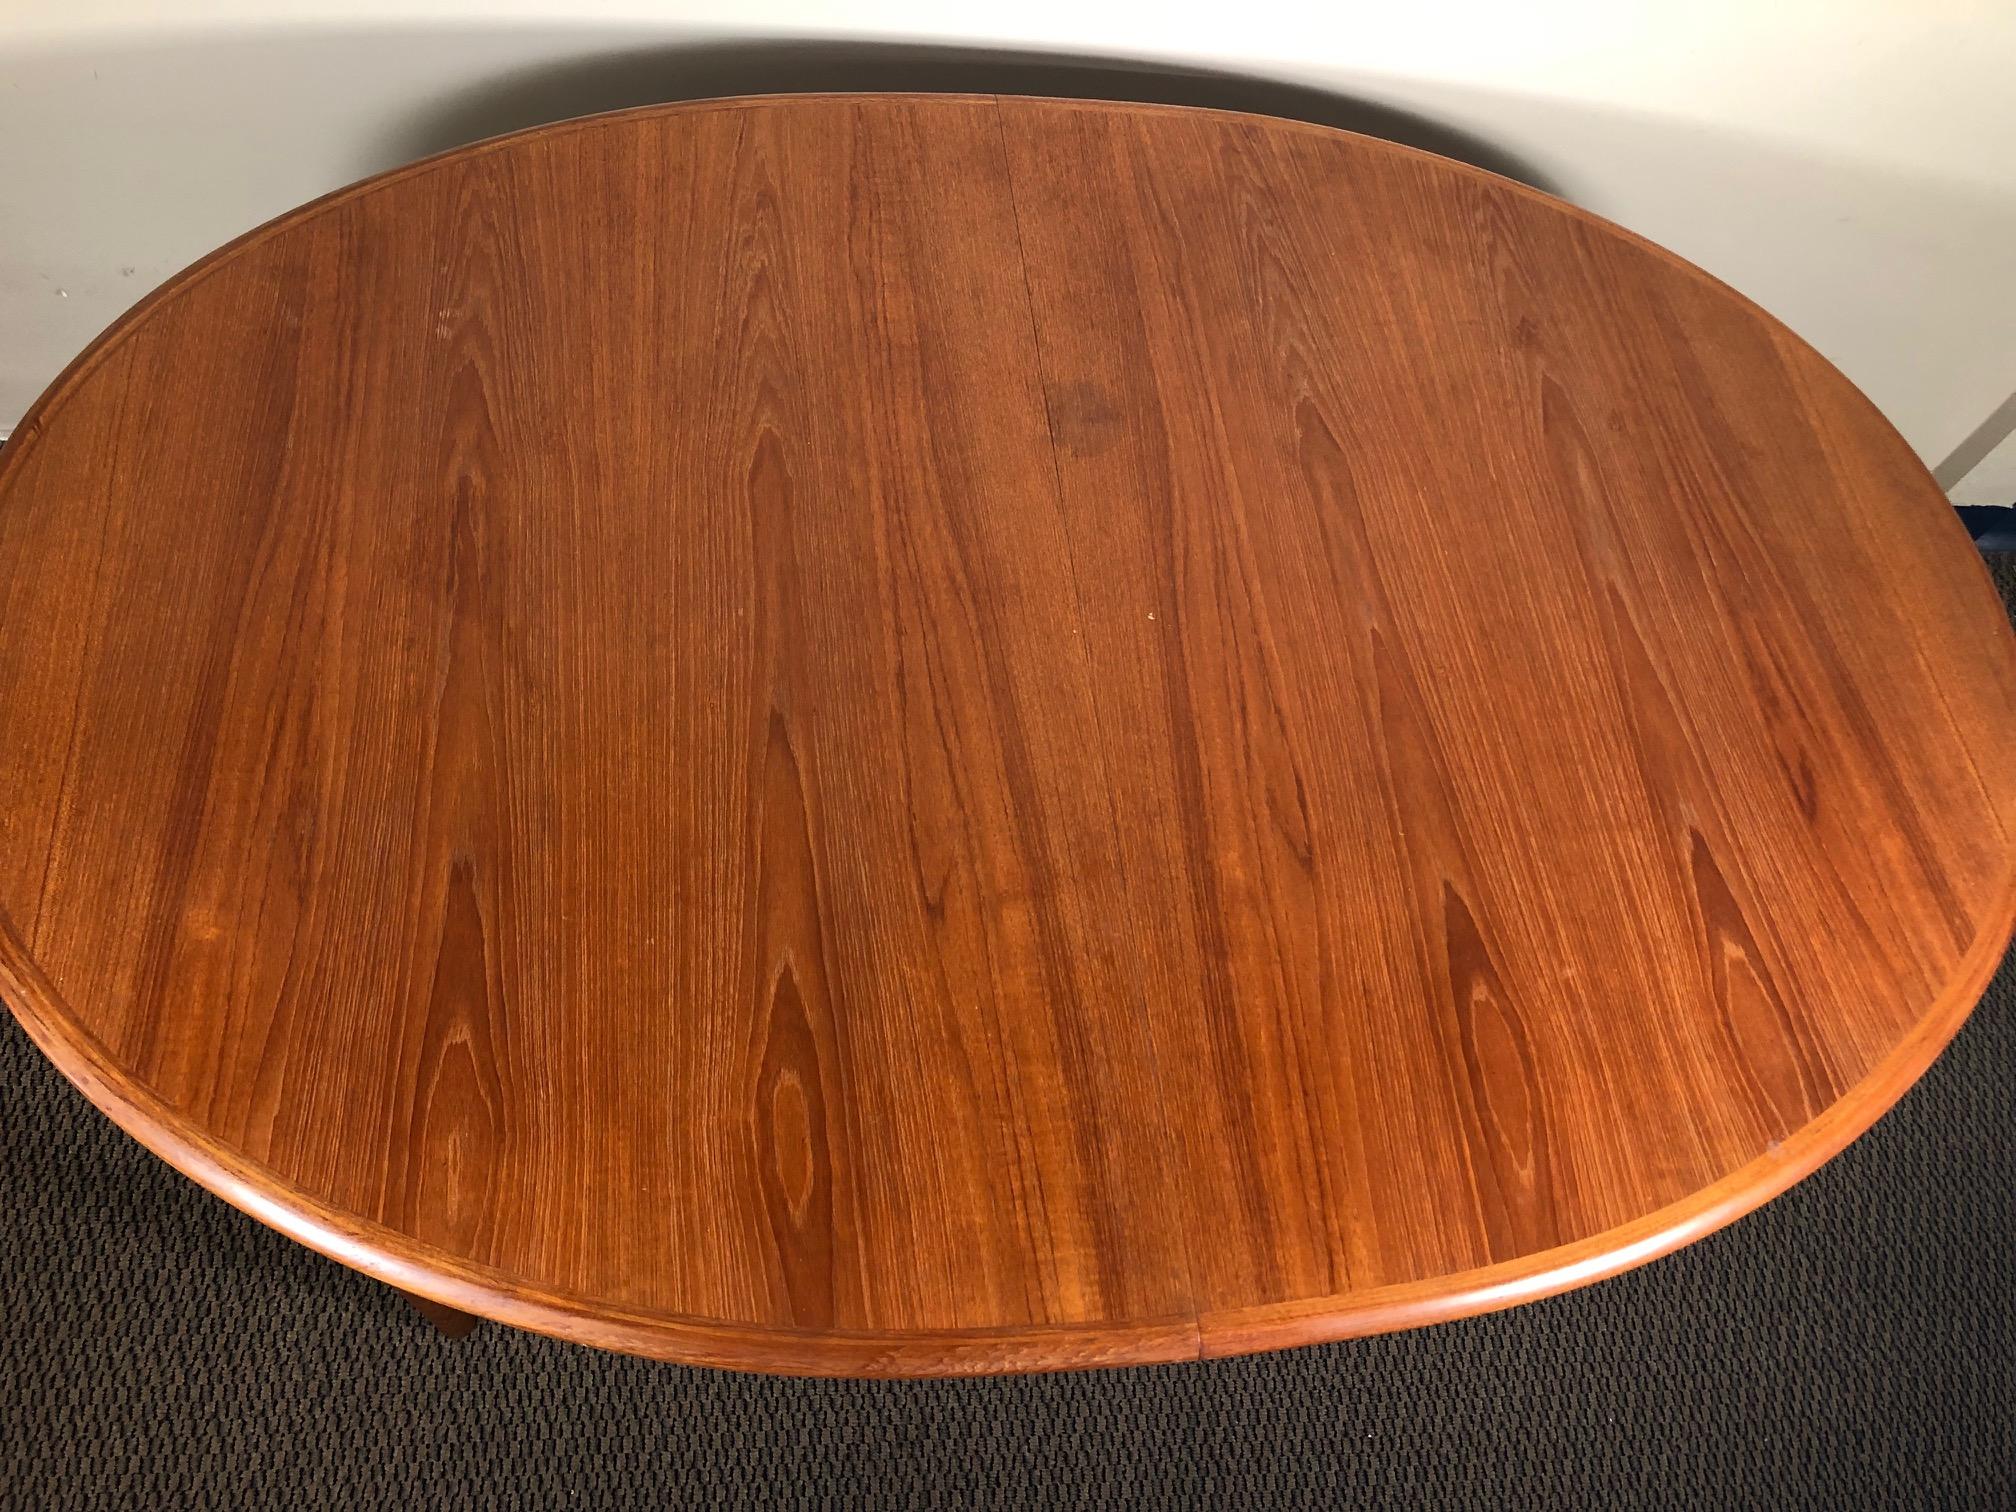 Midcentury Danish Teak Dining Table Extending Seats 10 people	 In Good Condition For Sale In Norcross, GA